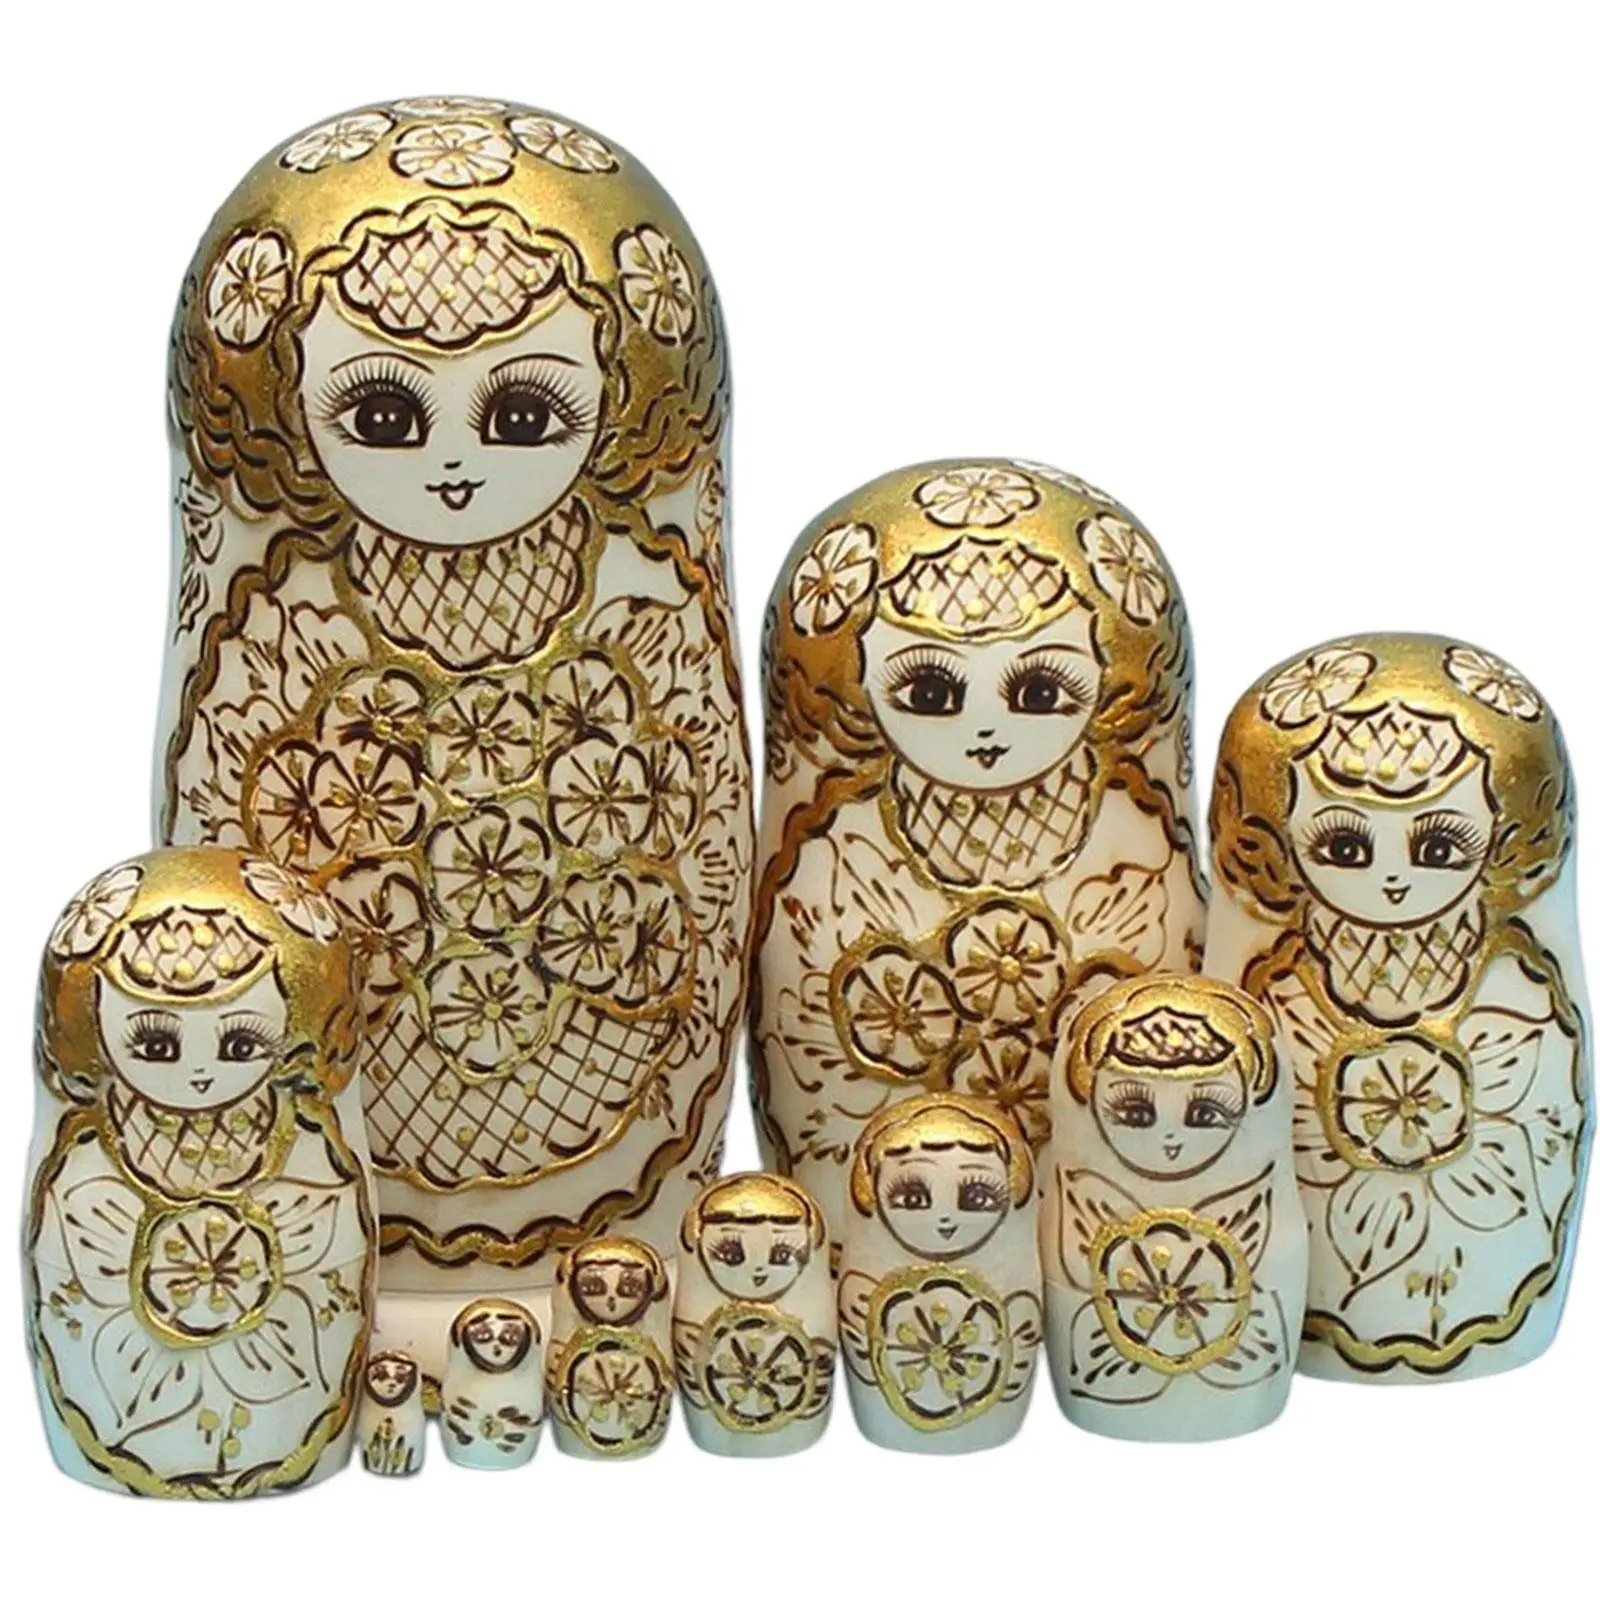 10x Hand Painted Russian Nesting Doll Figures Collectible for table